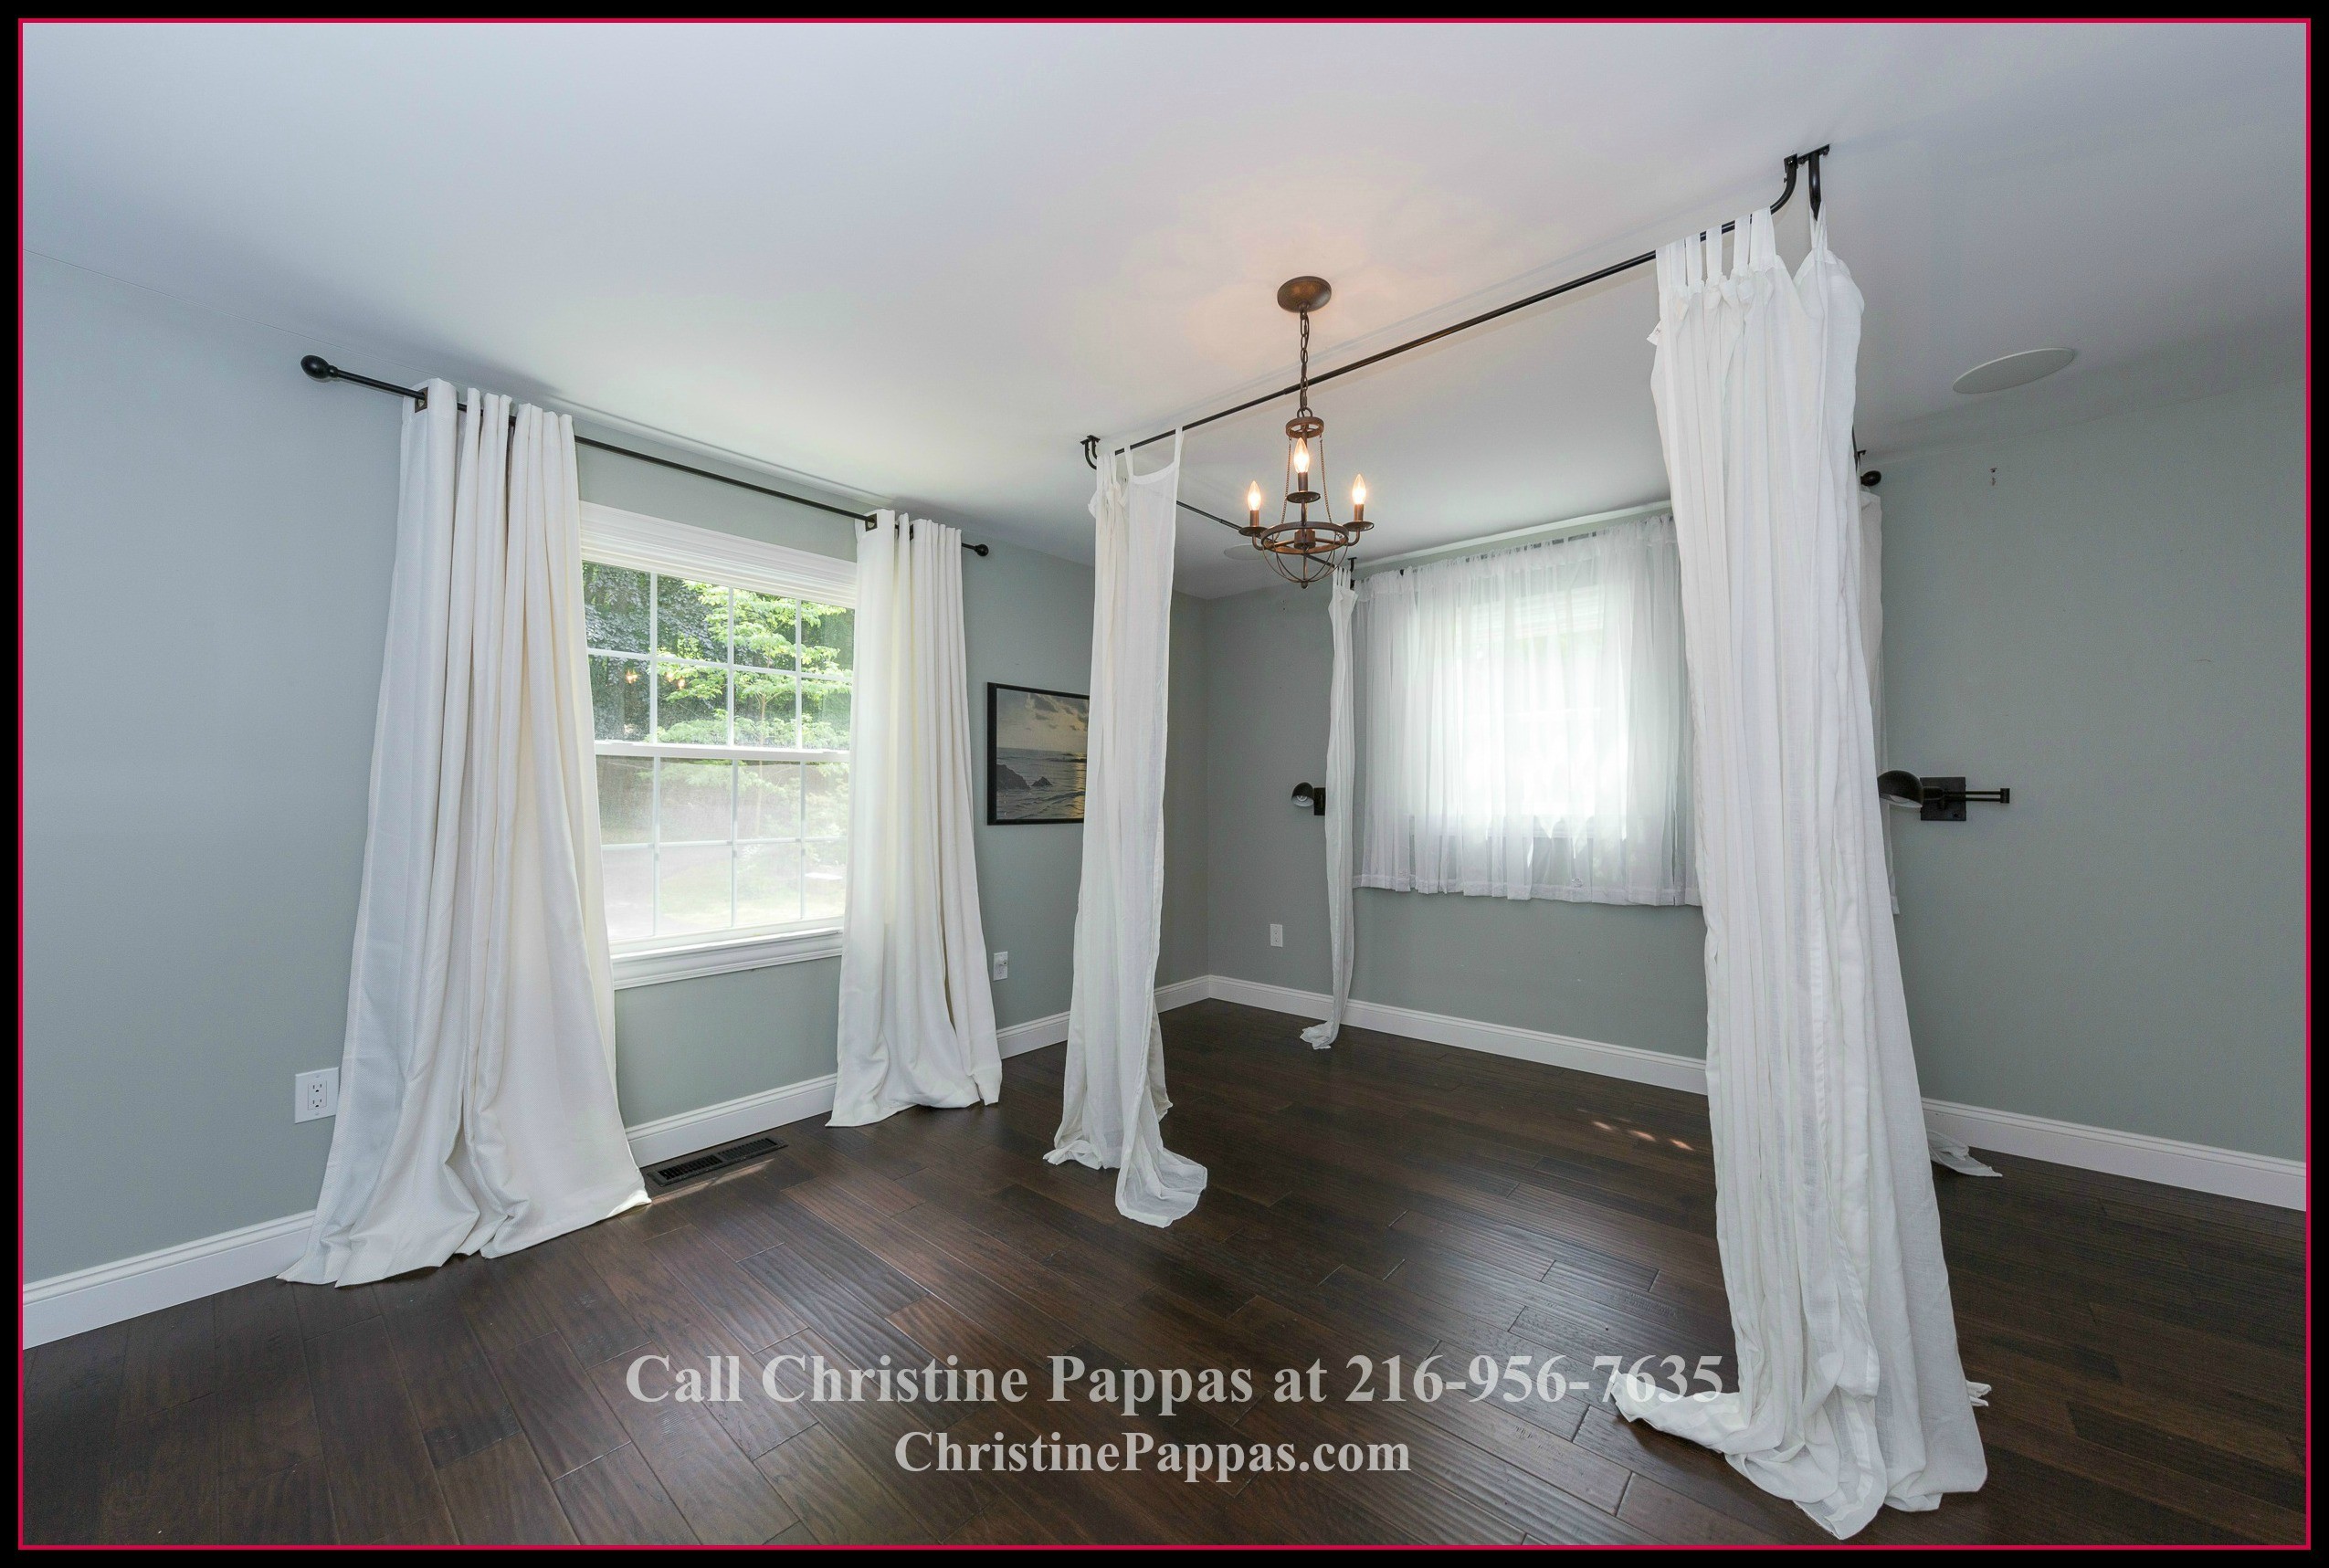 Enjoy memorable family time in the expansive master bedroom of this beautiful home for sale in Gates Mills OH.